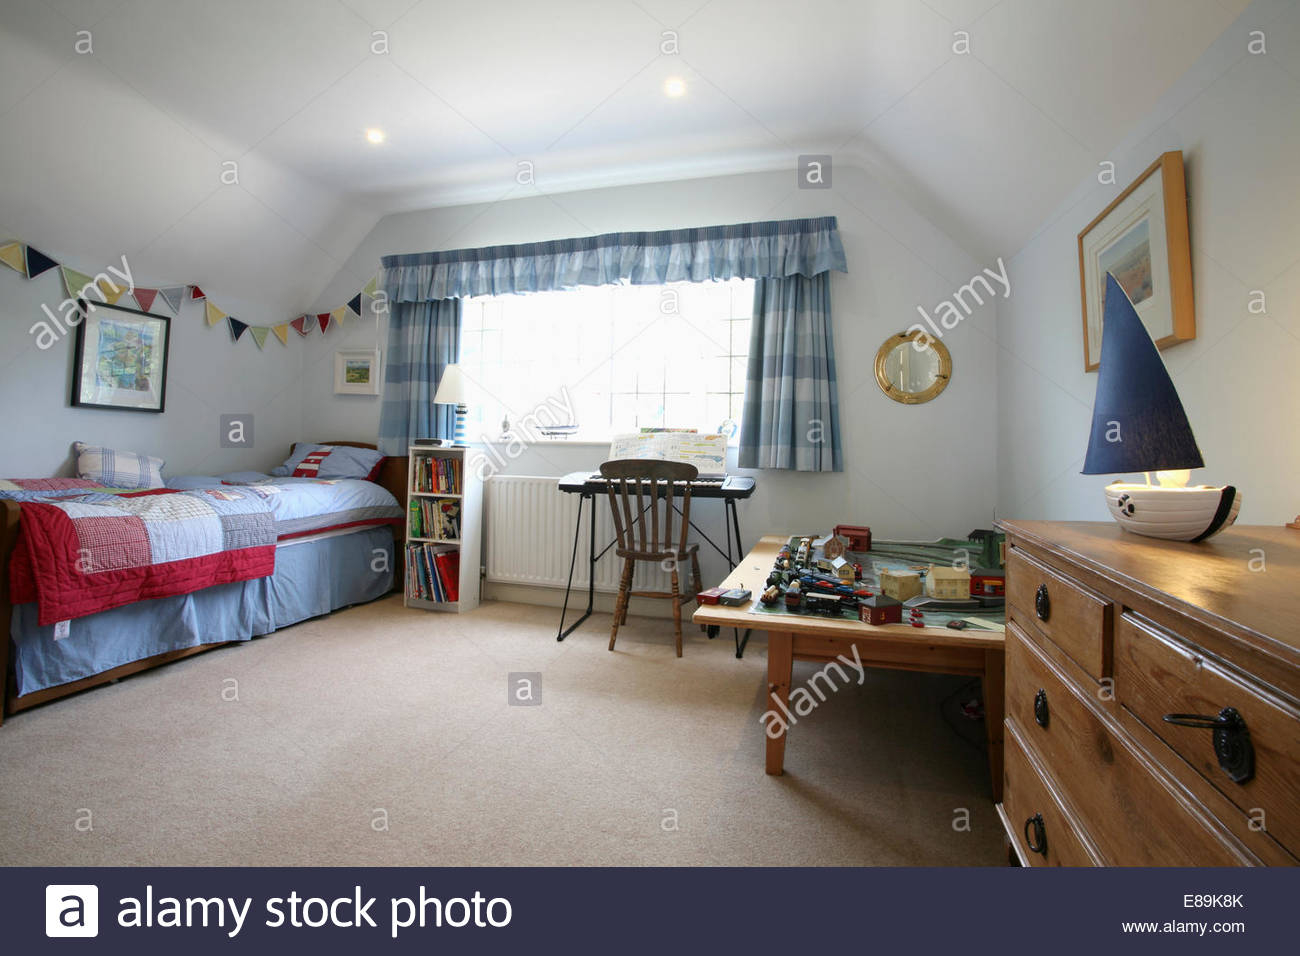 Cream Carpet And Blue White Checked Curtains In Boys Bedroom With pertaining to dimensions 1300 X 956